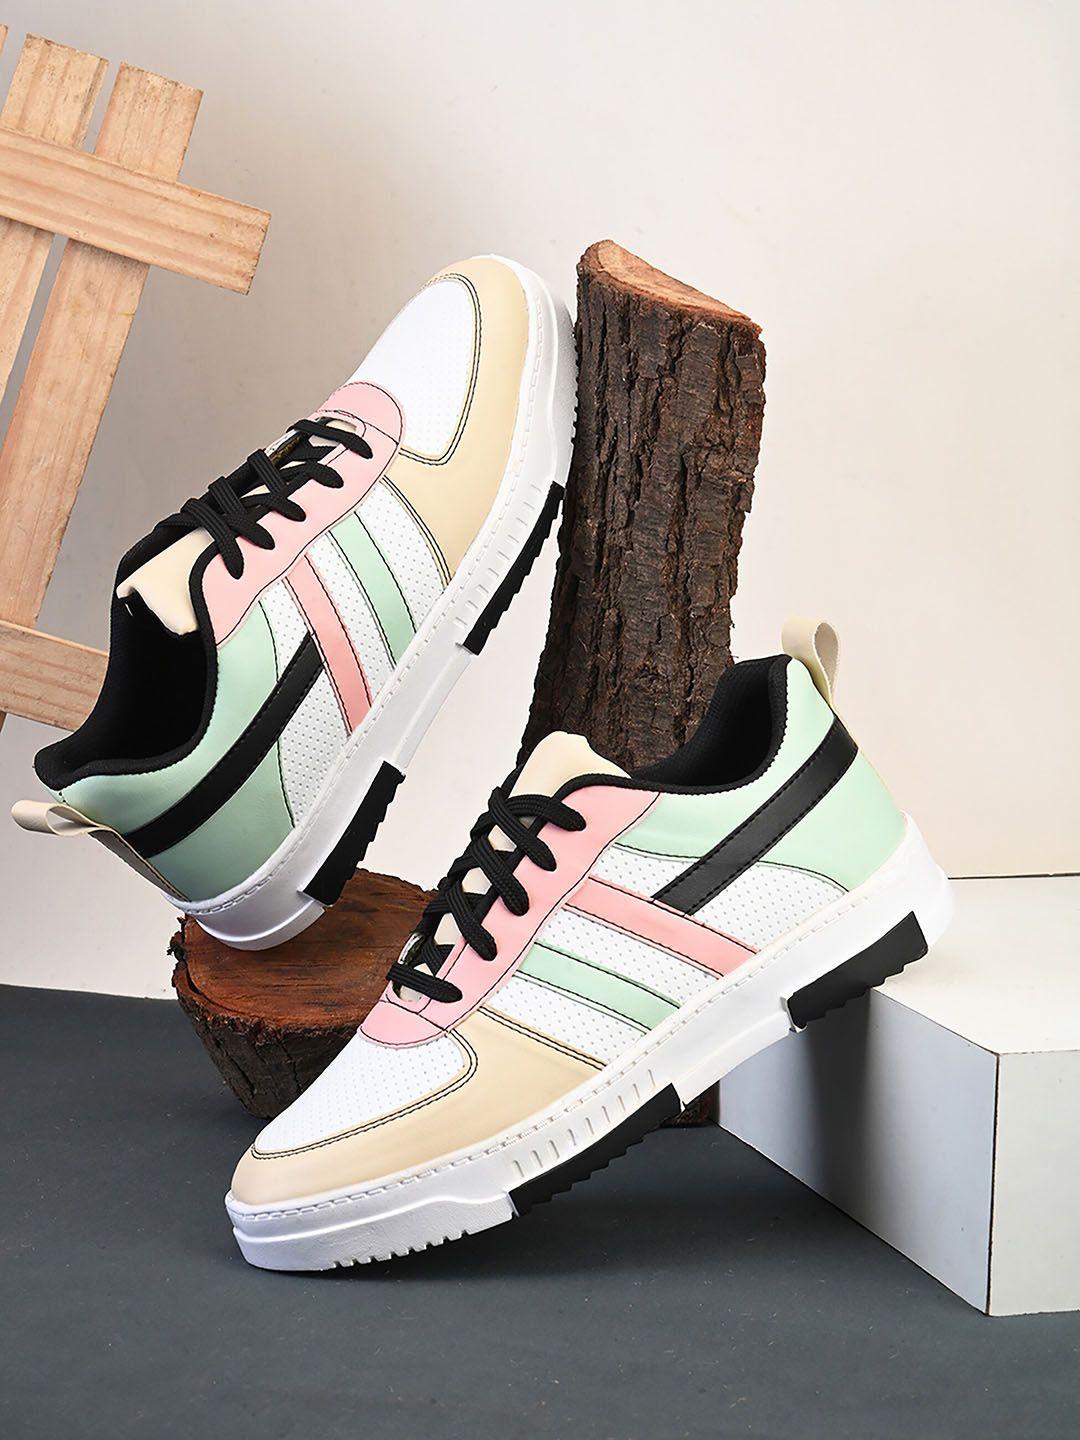 the roadster lifestyle co. men white & sea green striped antibacterial comfort sneakers